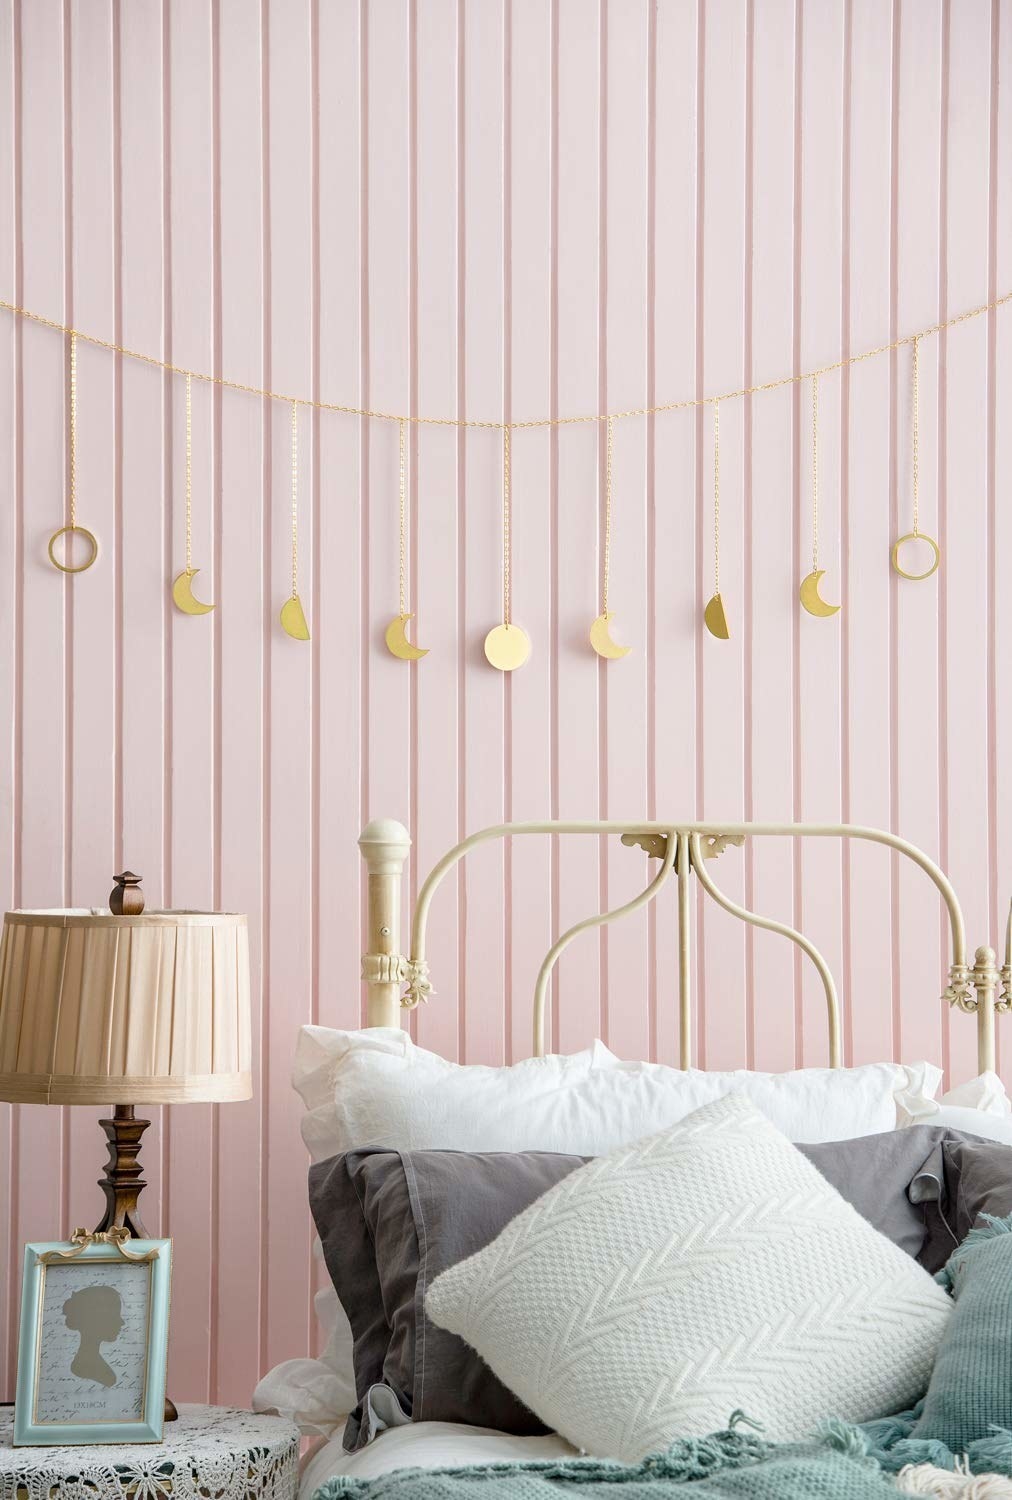 a string of garland over a headboard with moon phase charms hanging from it